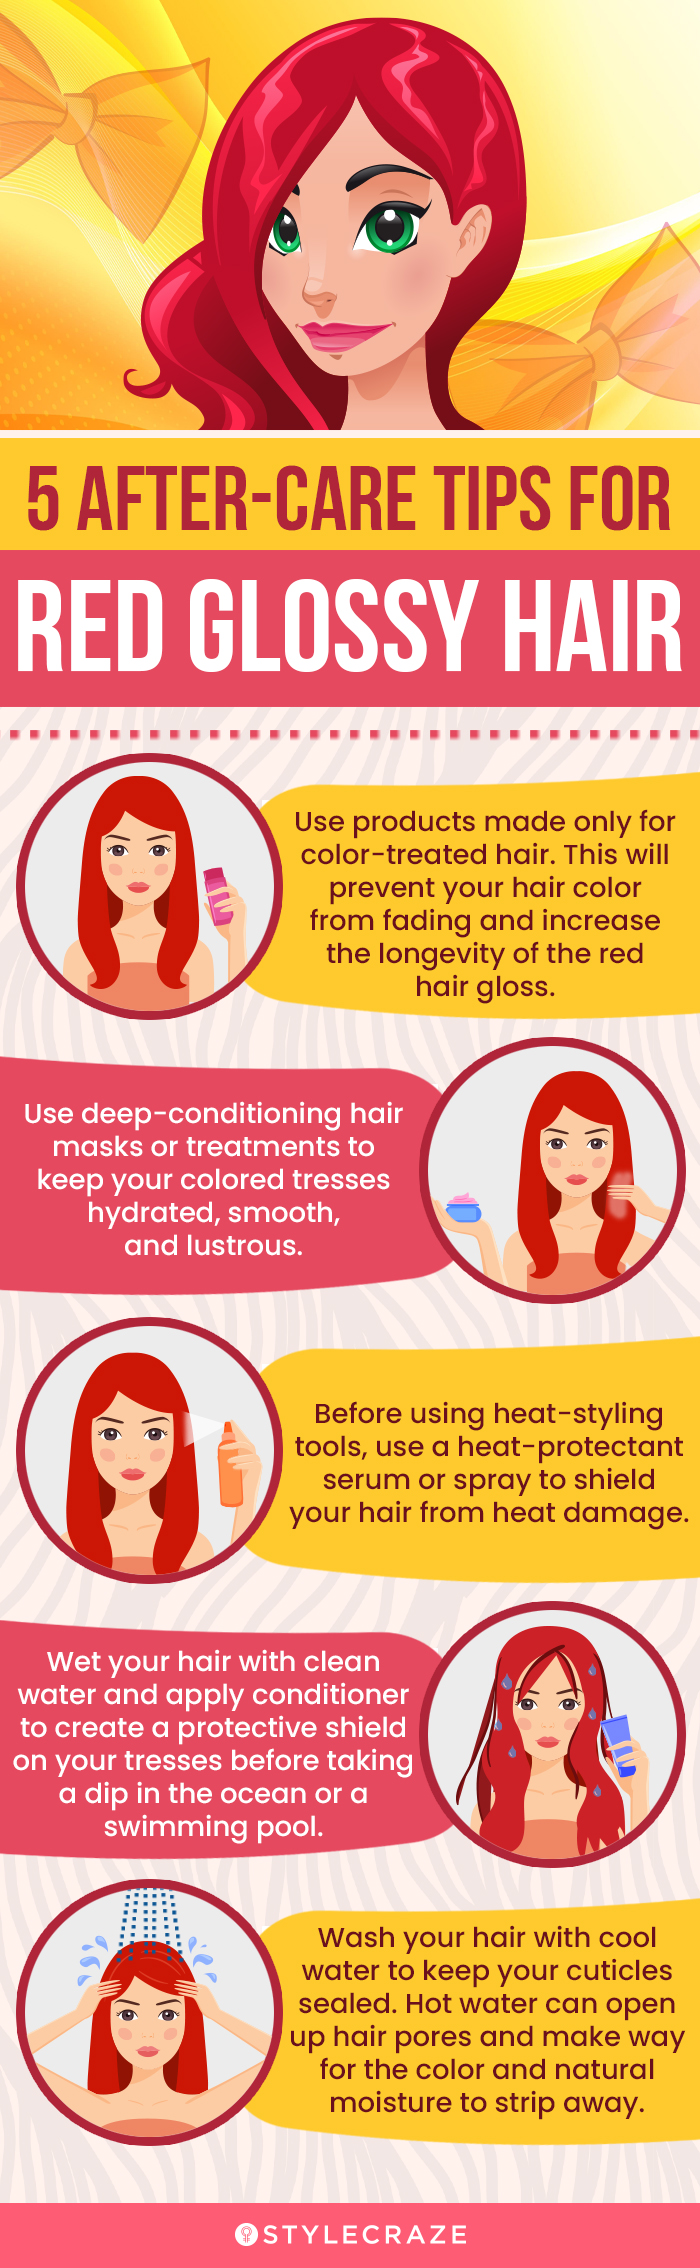 5 After-Care Tips For Red Glossy Hair (infographic)